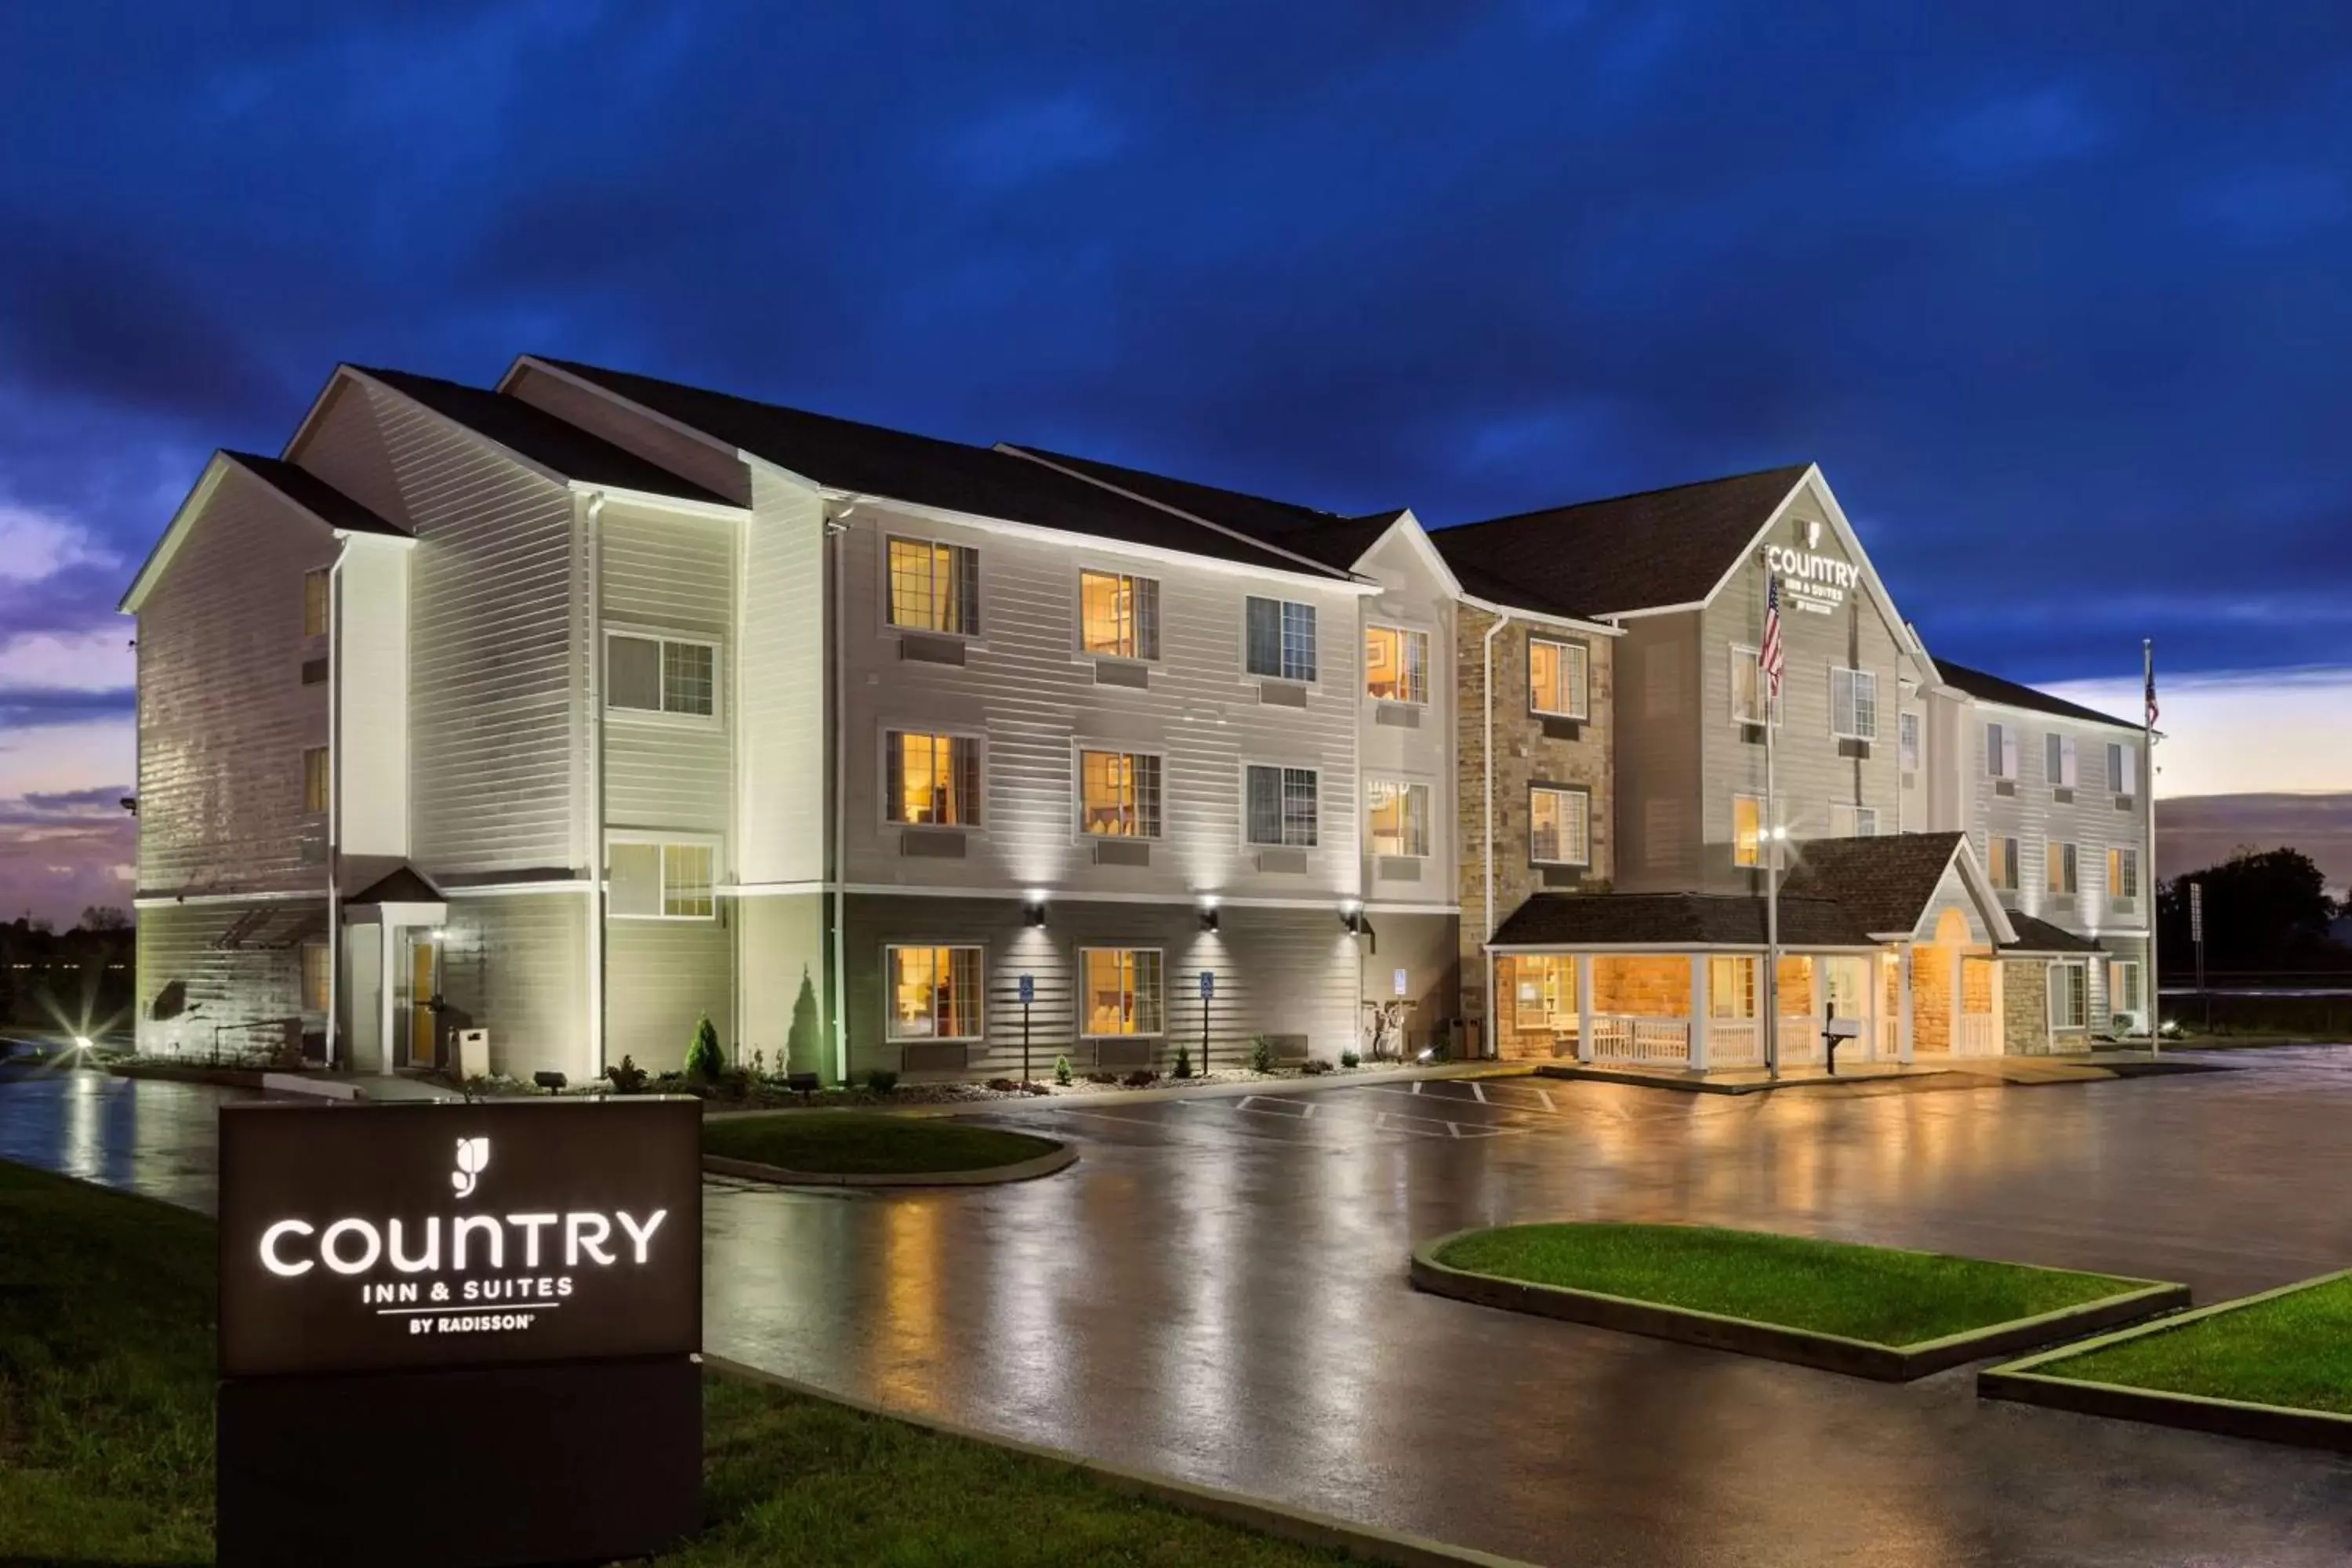 Property building in Country Inn & Suites by Radisson, Marion, OH